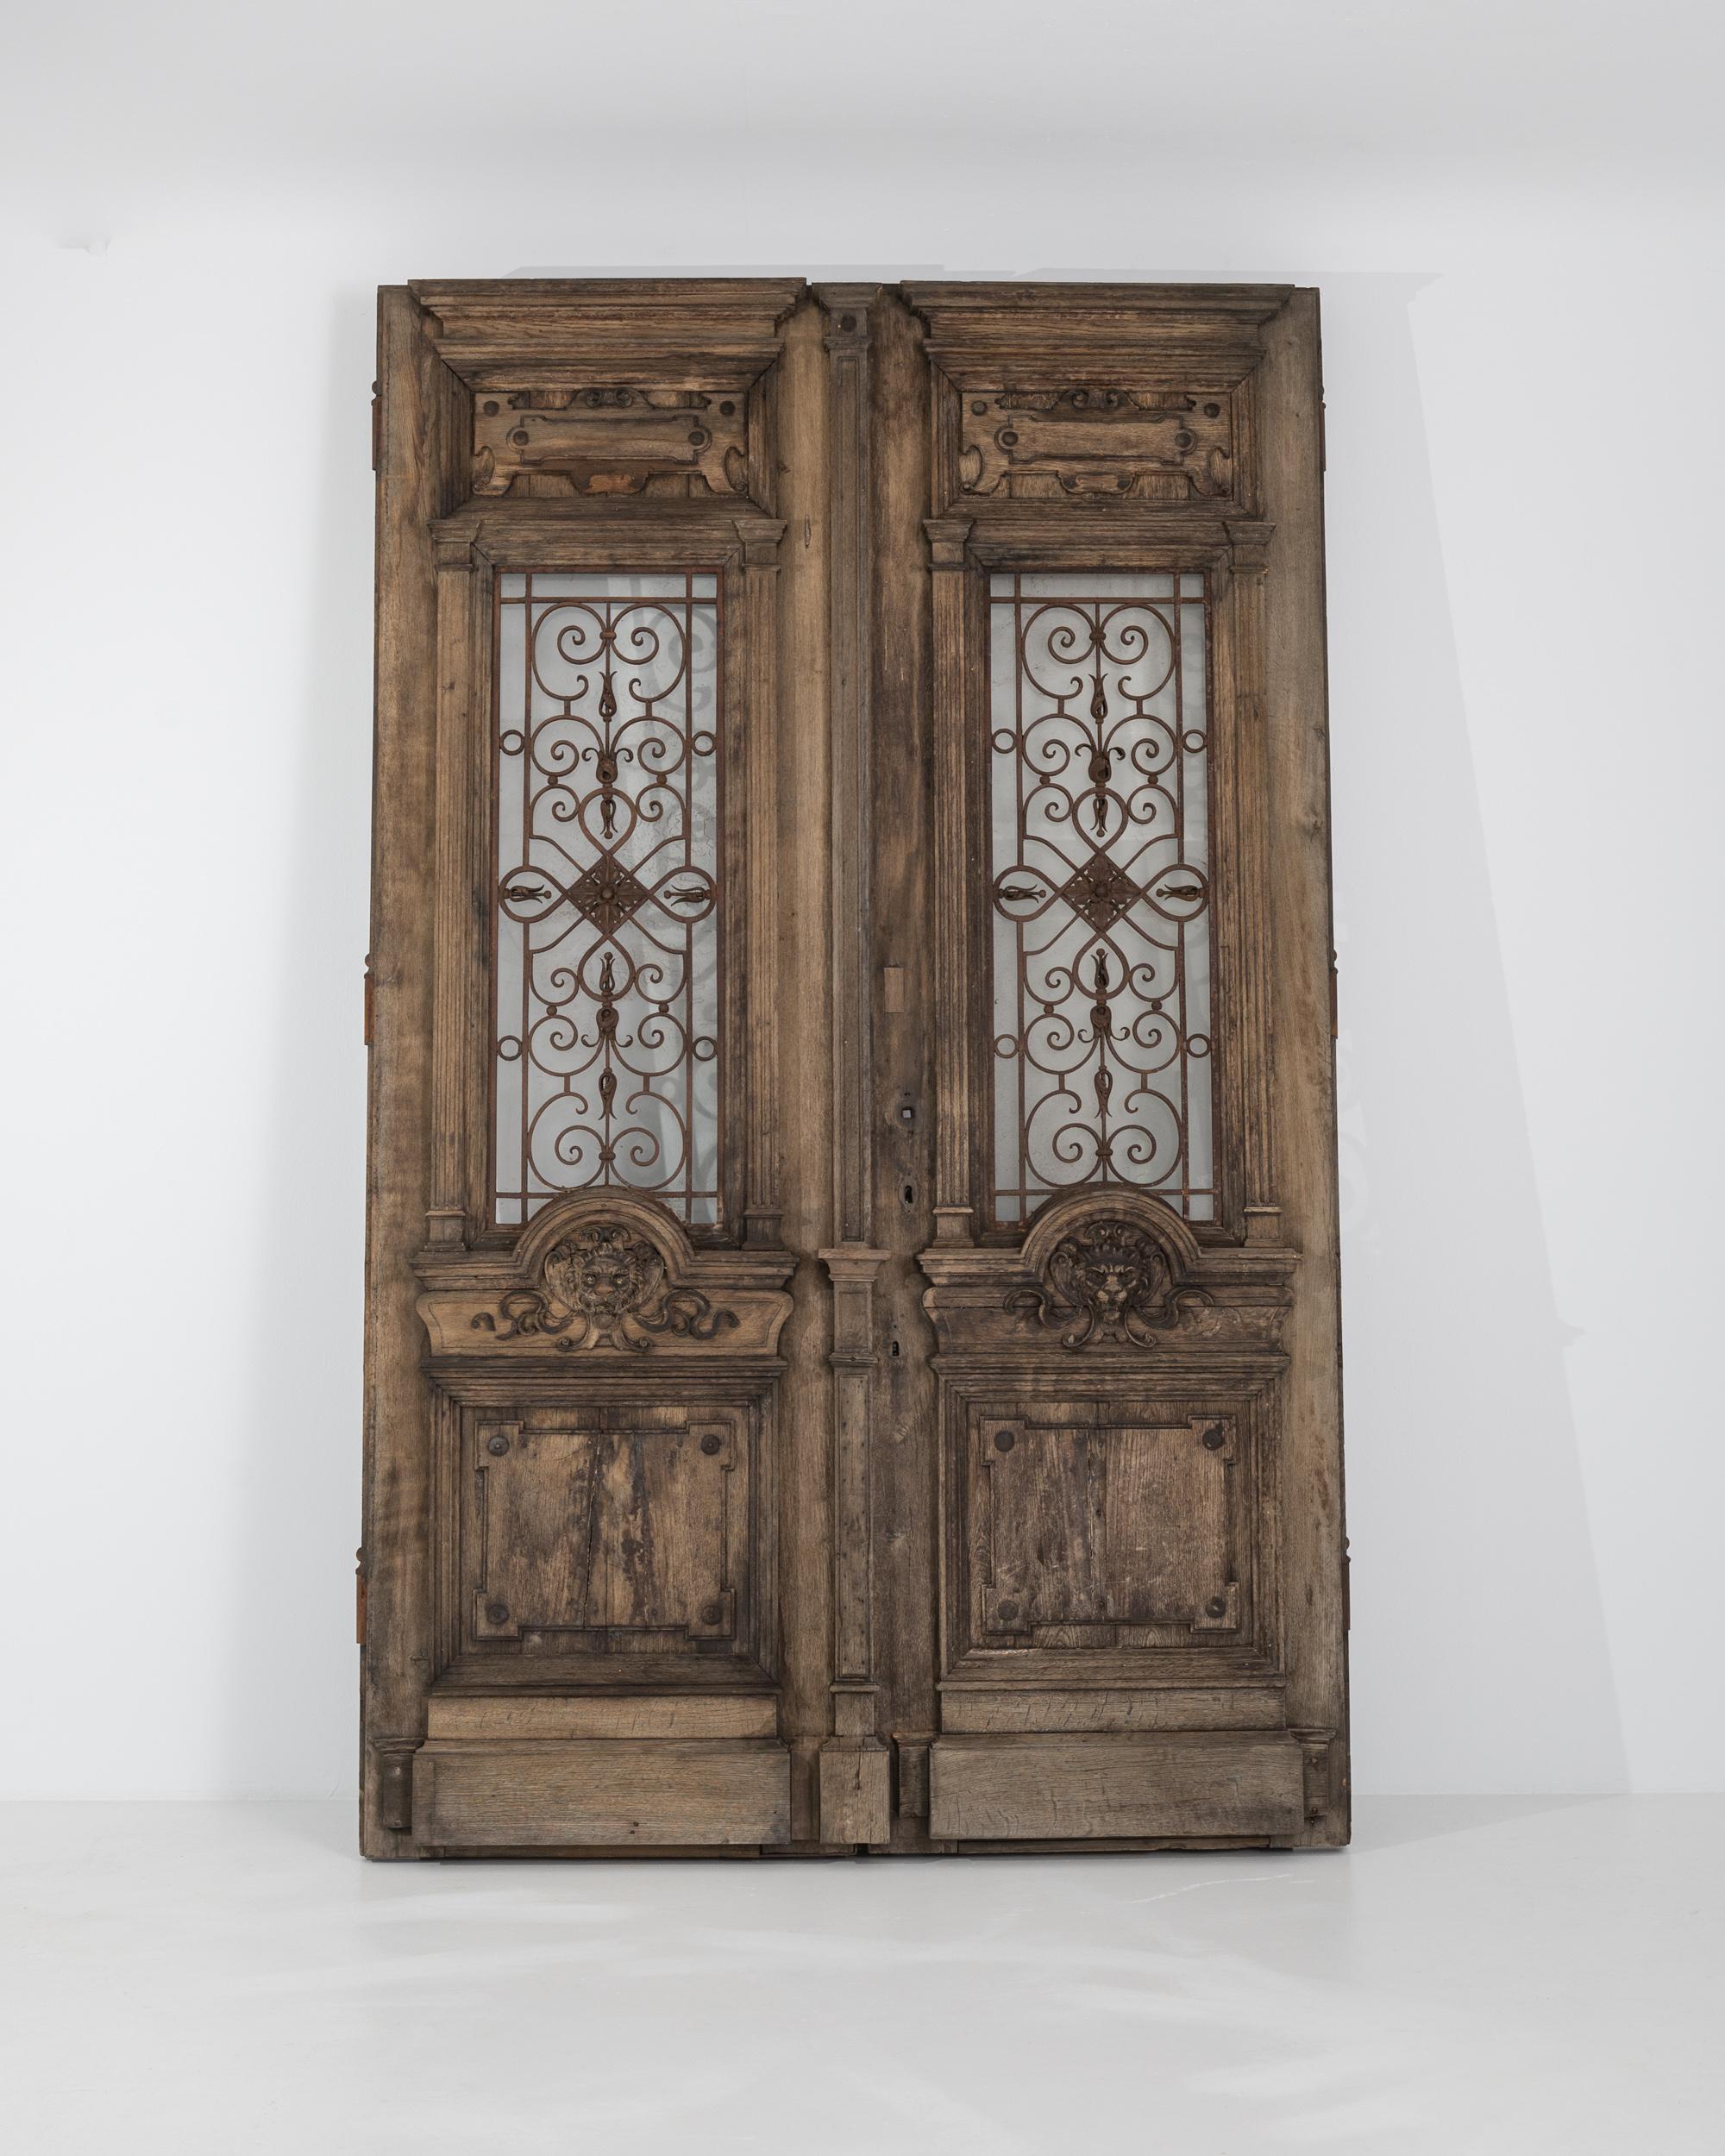 Mysterious and ornate, this magnificent pair of antique wooden doors were made to be marveled over. Built in Central Europe in the 1800s, the weathered patina of the wood creates an impression of faded grandeur, but the beautifully crafted